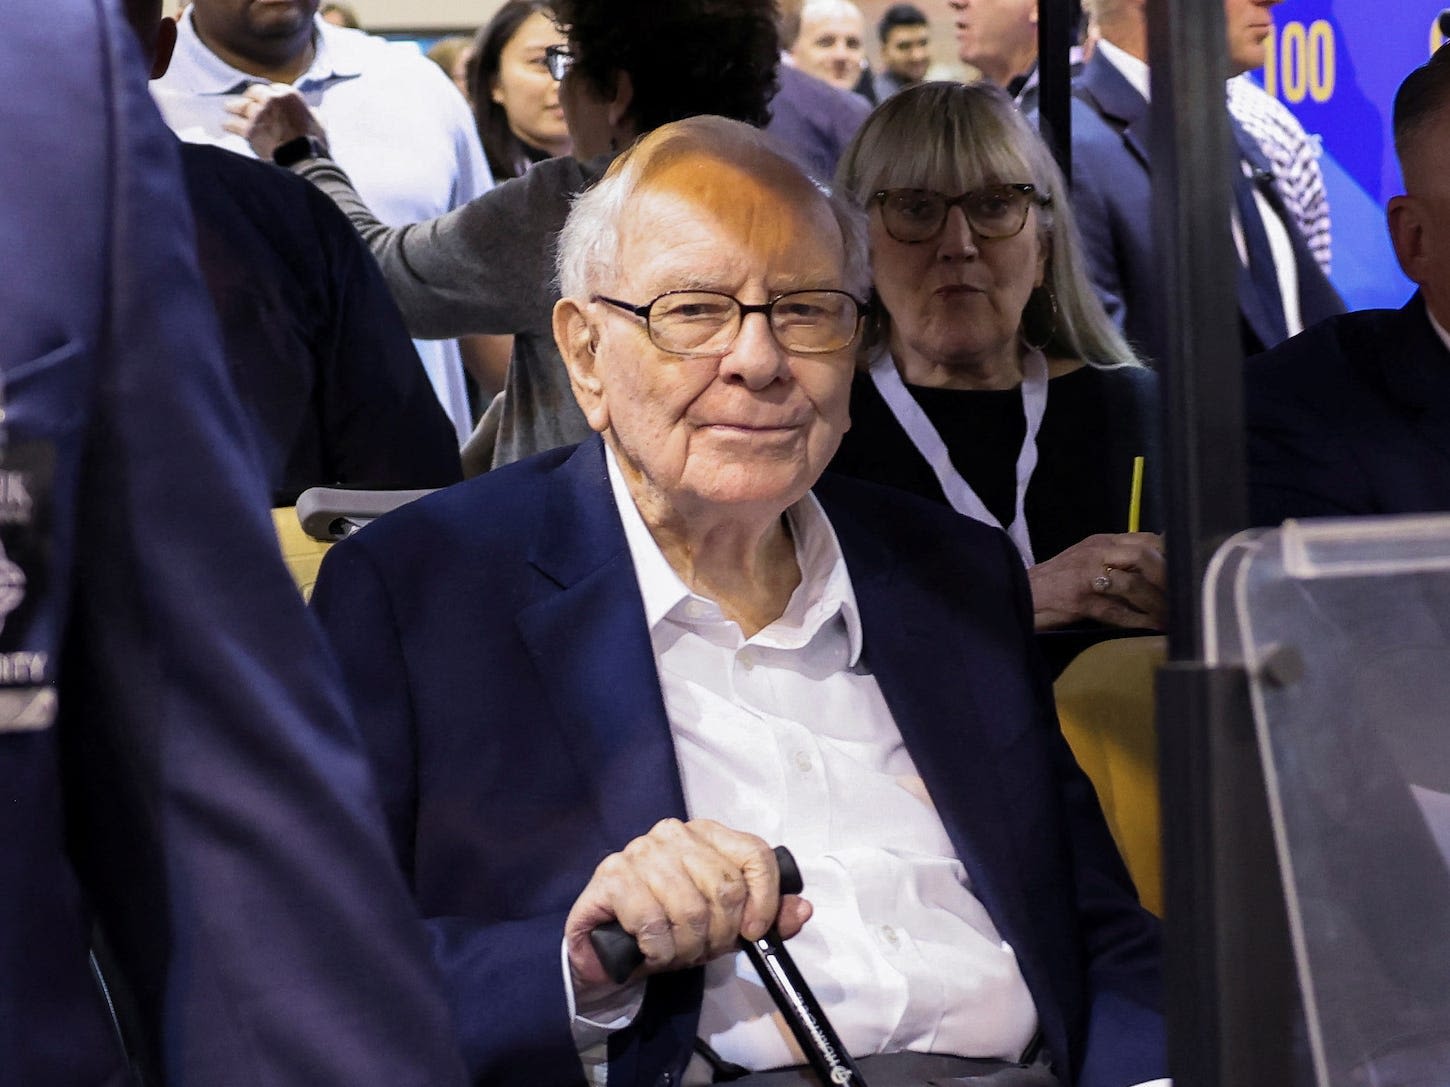 How Warren Buffett, set to turn 94 this year, is thinking about his age and his business